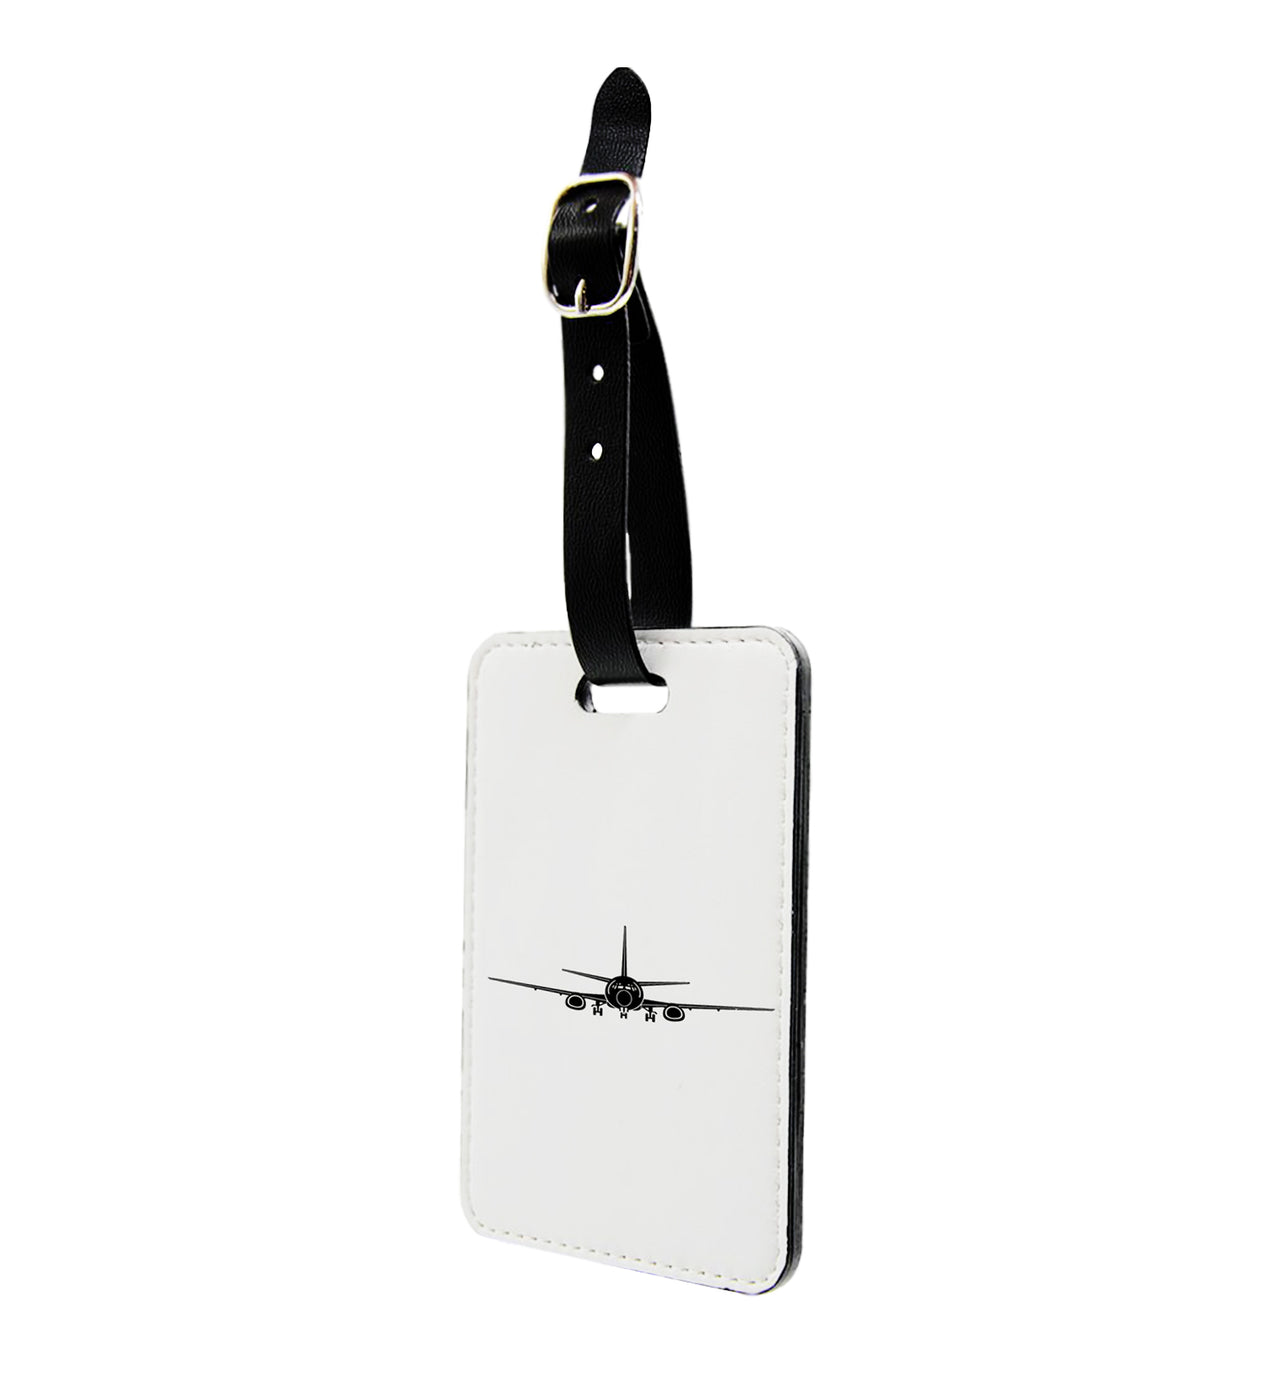 Boeing 737 Silhouette Designed Luggage Tag